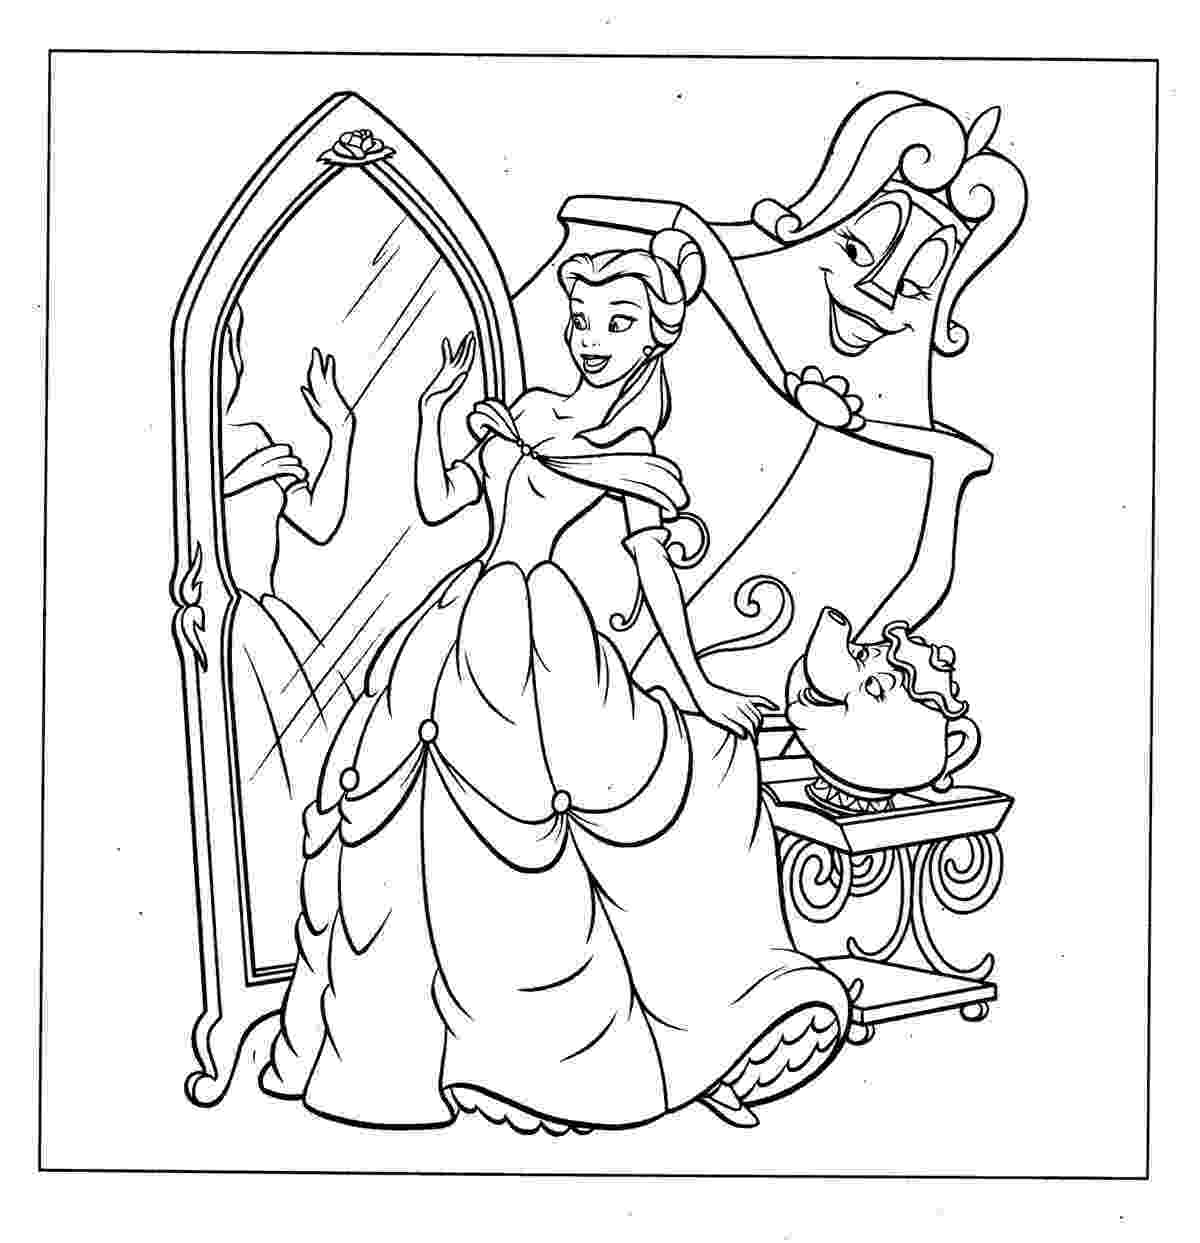 free coloring pages of all the disney princesses disney princess coloring pages ideas all disney free princesses coloring the of pages 